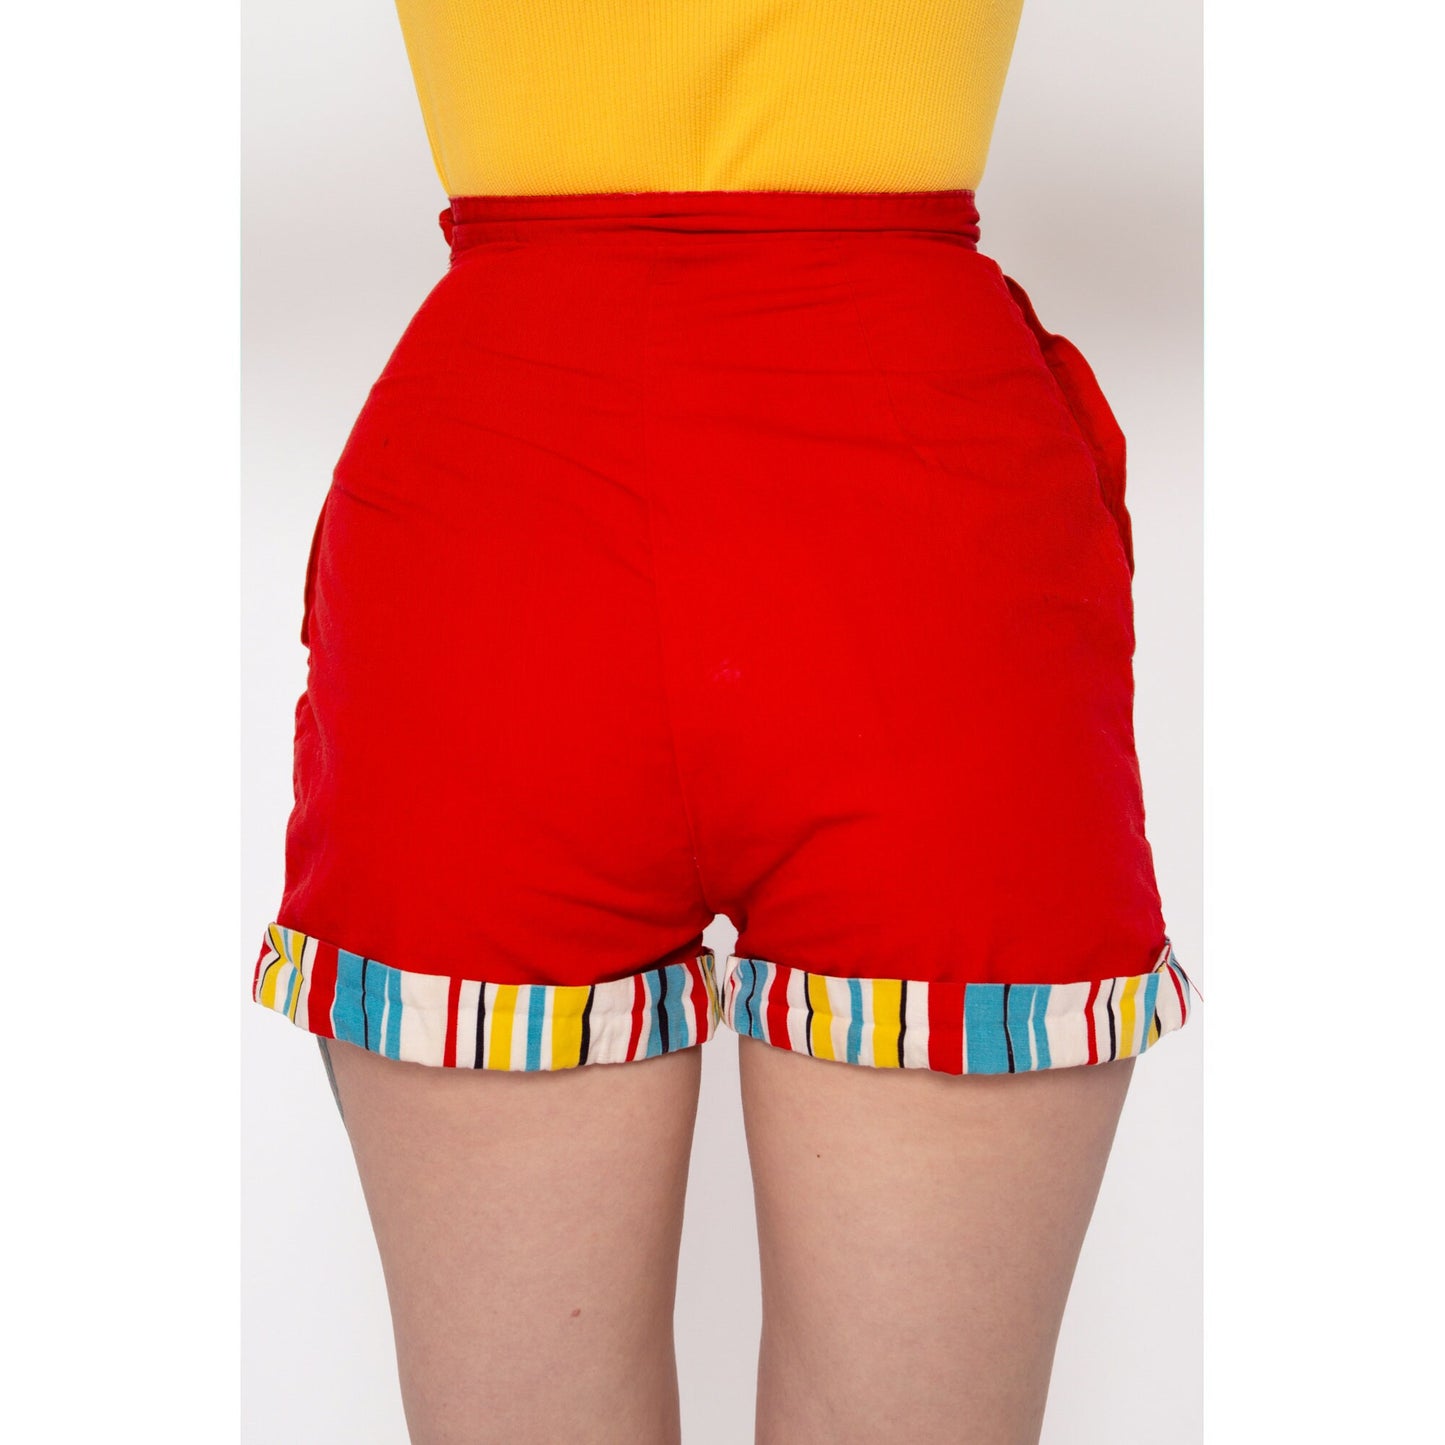 XXS 60s Red Striped Trim Rockabilly Shorts 21" | Retro Vintage High Waisted Pinup Shorts